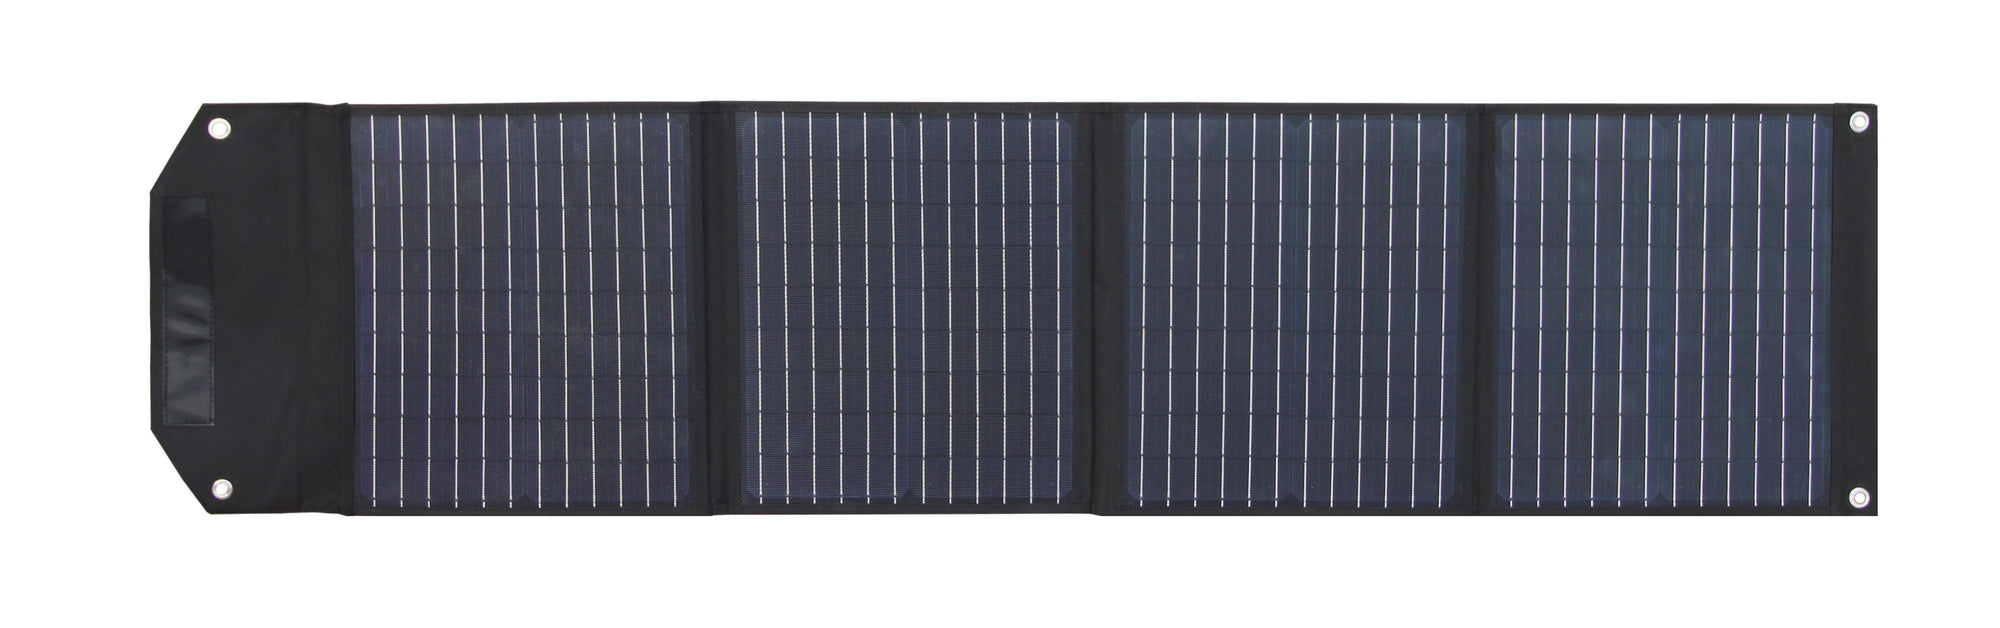 Blutron SP100 100W Foldable Solar Panel for Power Station